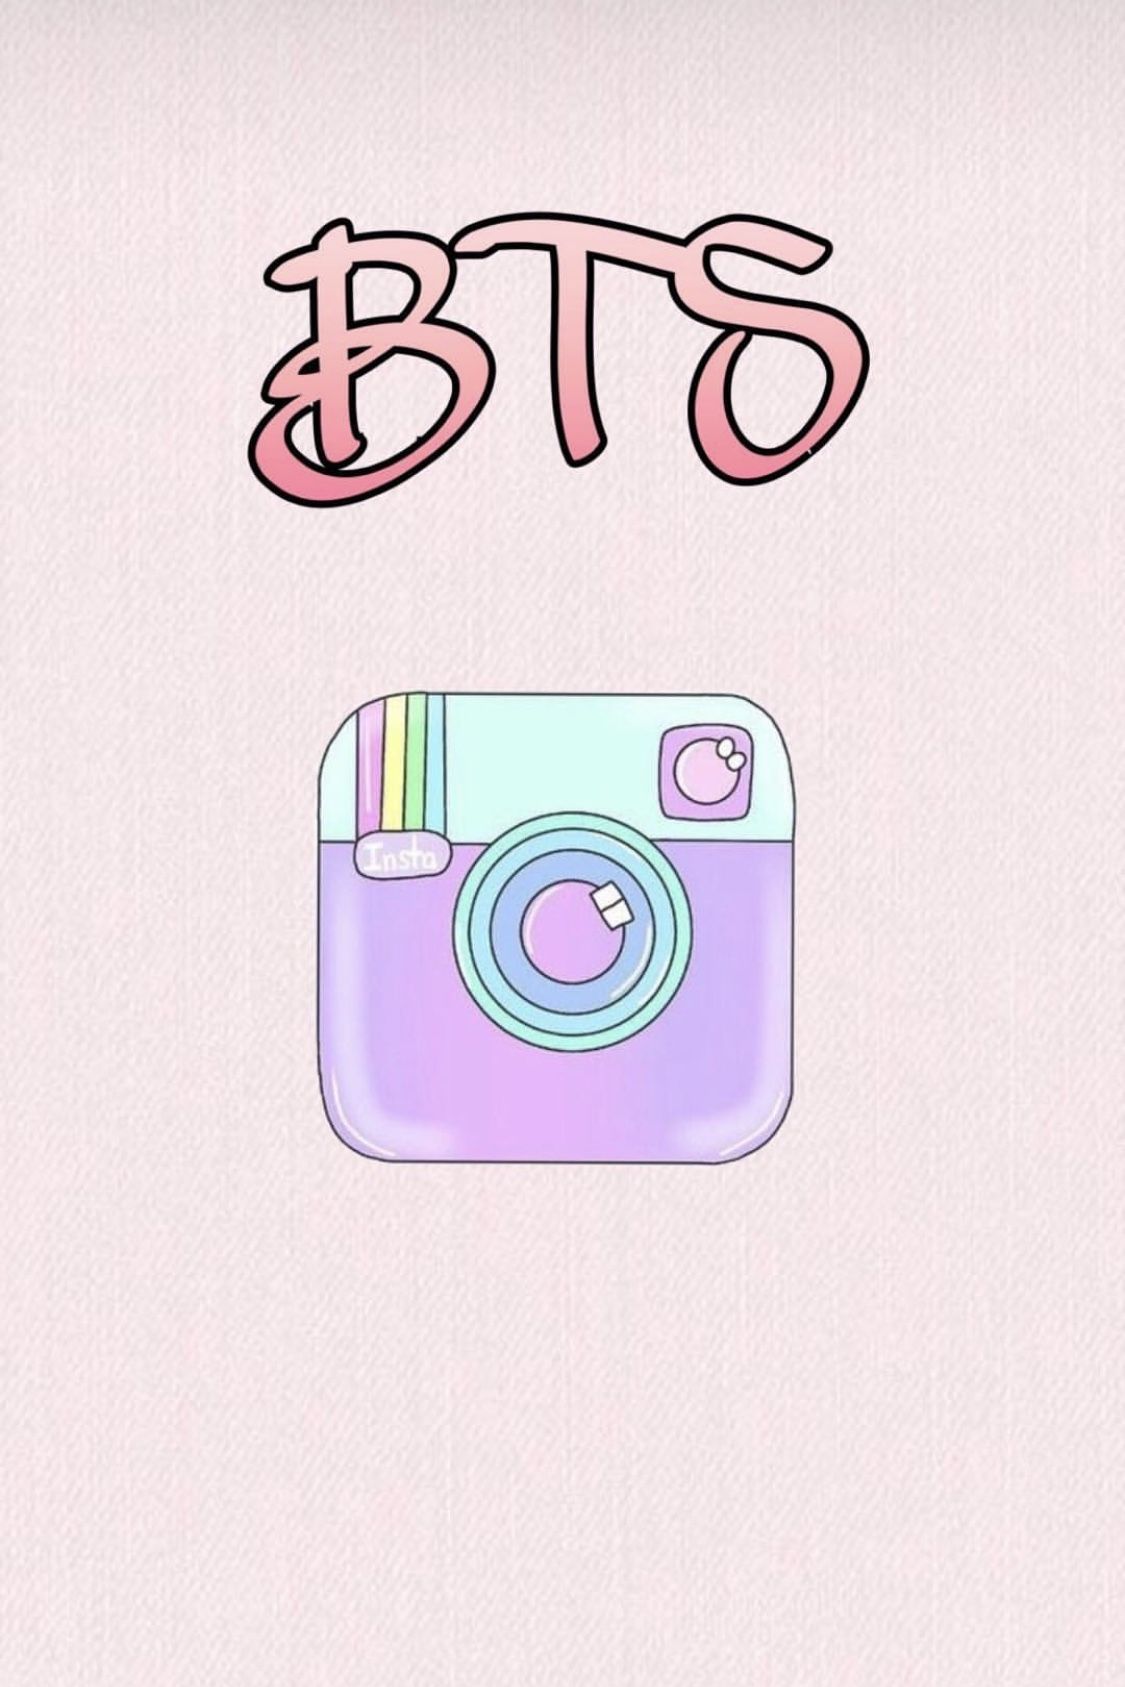 Aesthetic Instagram Highlight Cover Bts. Instagram aesthetic, Instagram highlight icons, Instagram icons